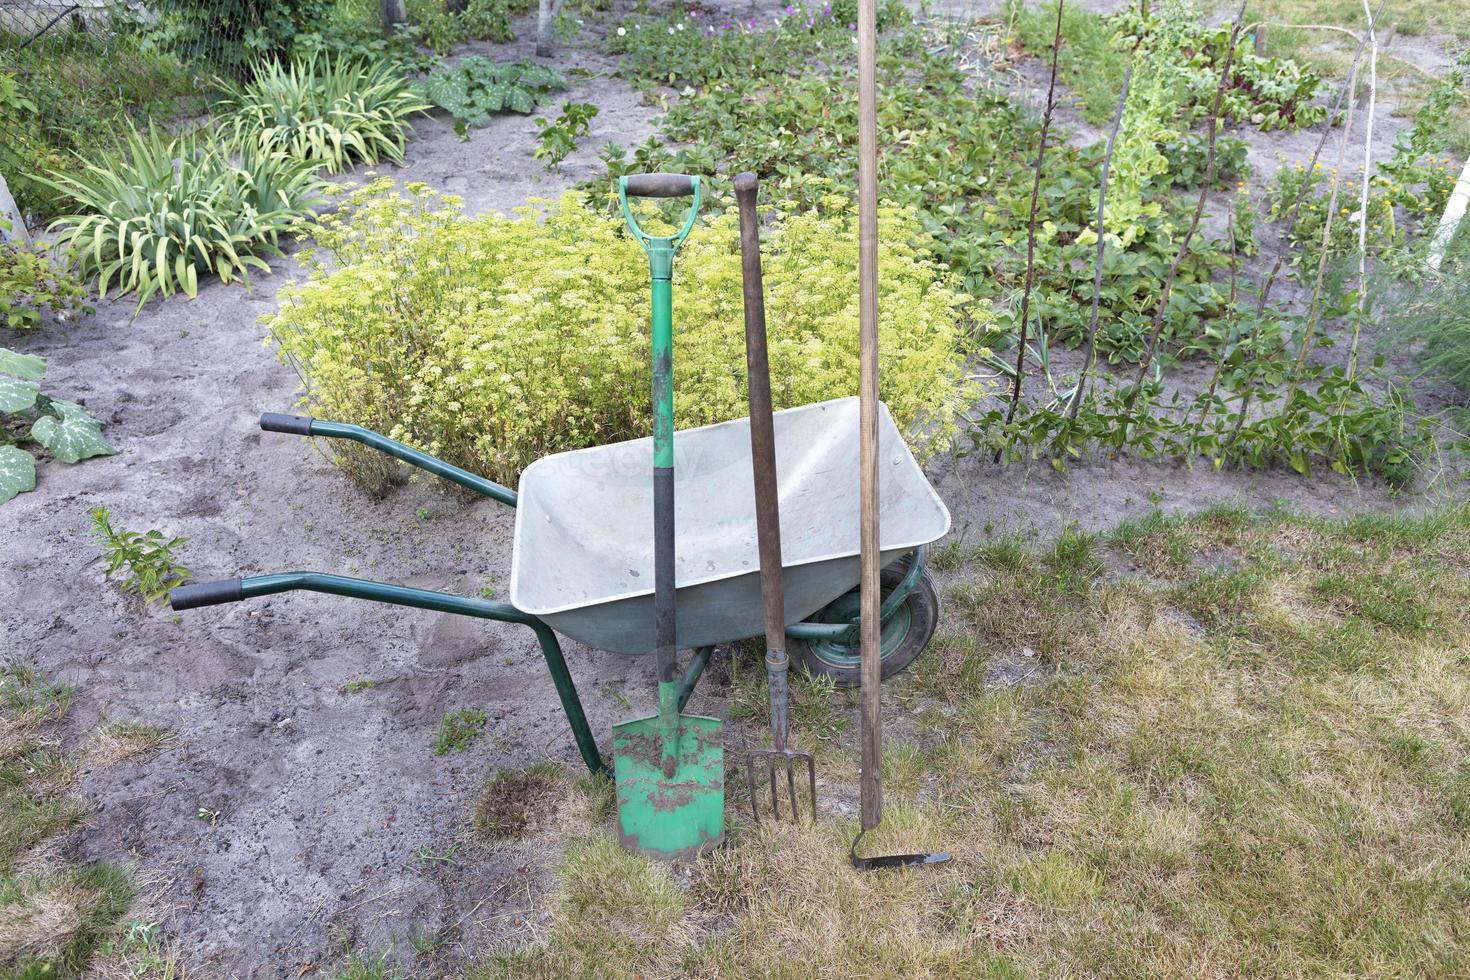 A garden tool and a wheelbarrow used on a personal plot. photo